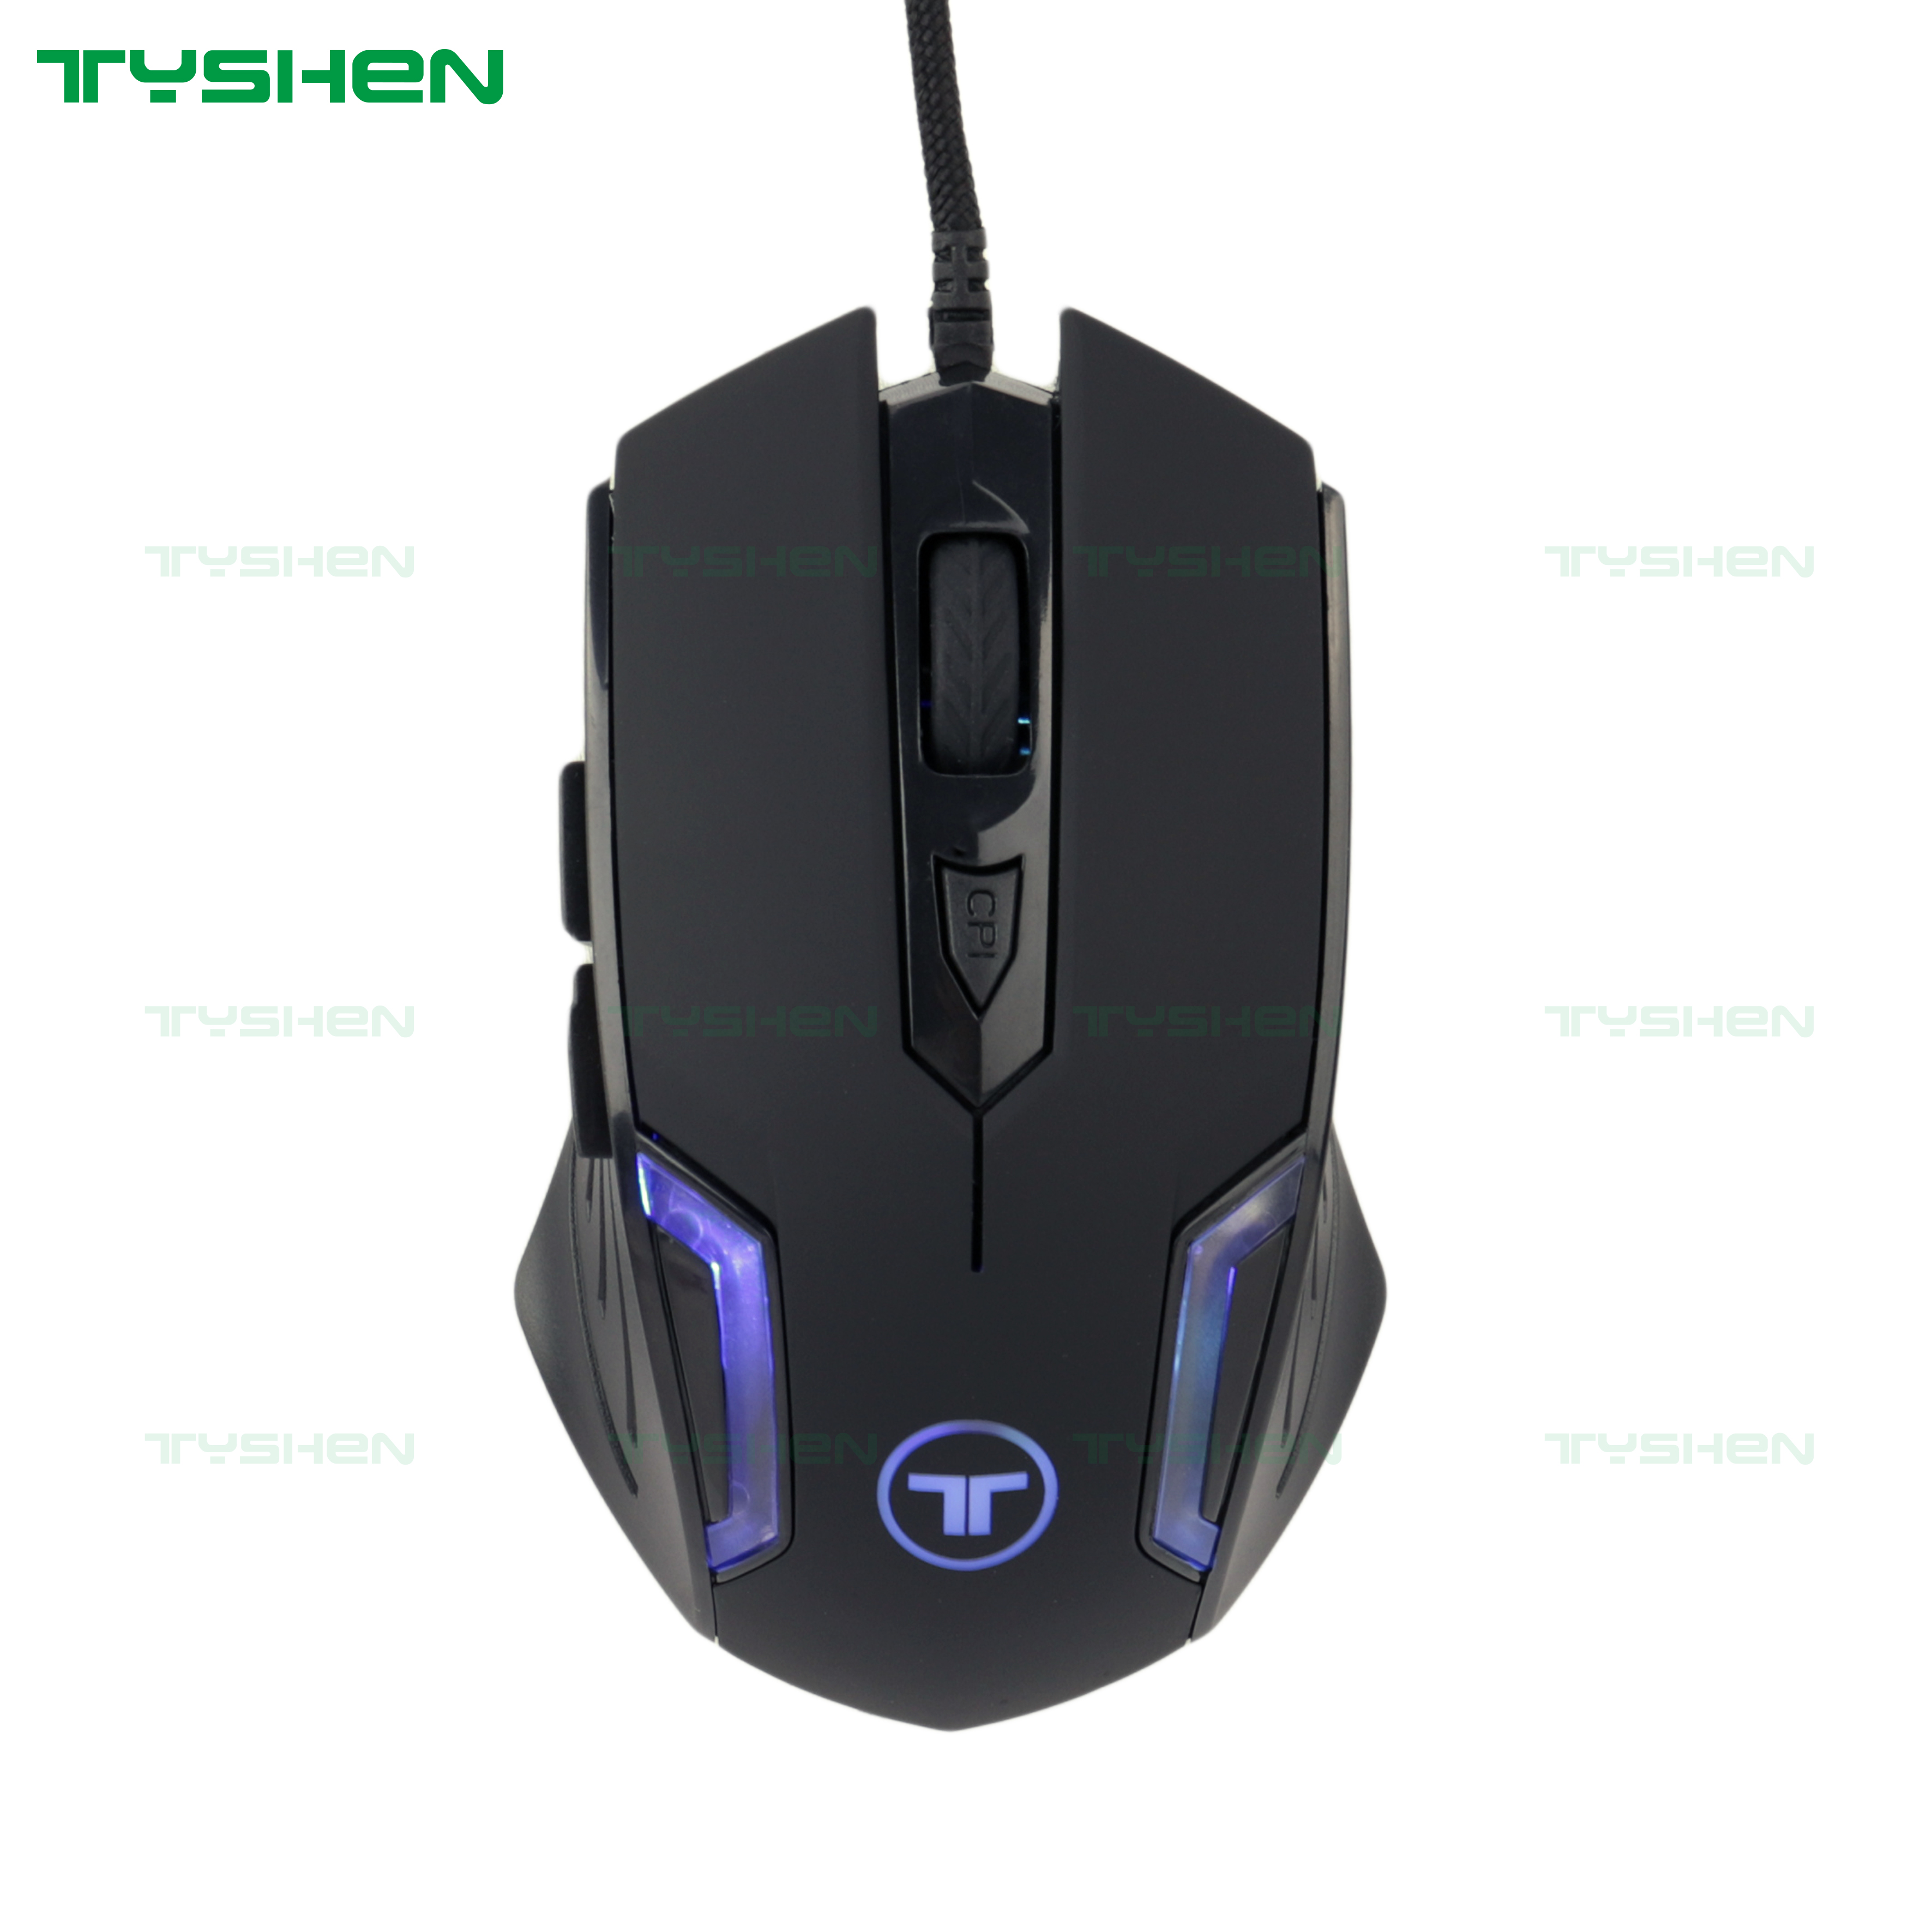 OEM USB 4 in 1 mouse keyboard headset combo gaming rgb led light backlit keyboards mouse pad gamer pc table best feeling combo